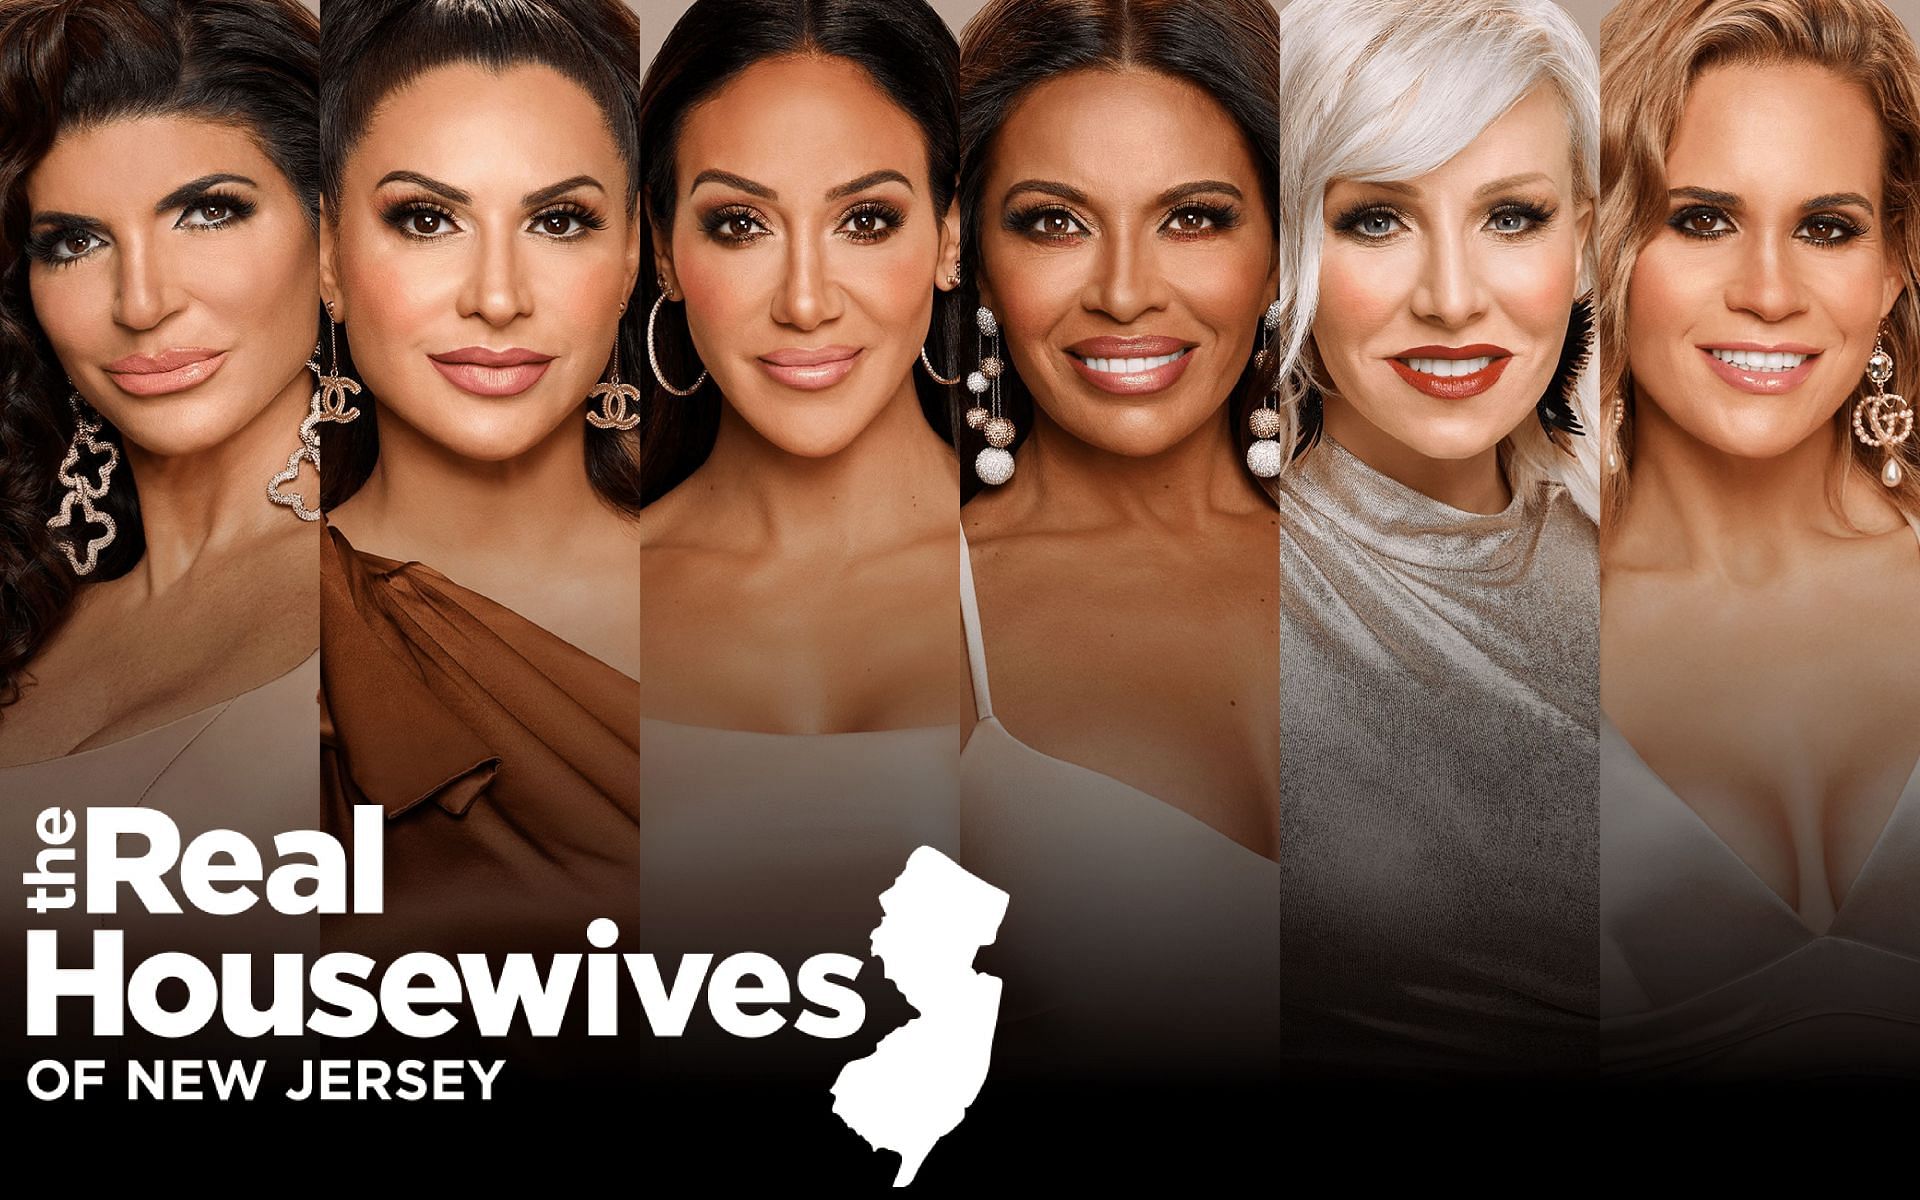 ‘The Real Housewives of New Jersey' cast list Teresa Giudice, Melissa